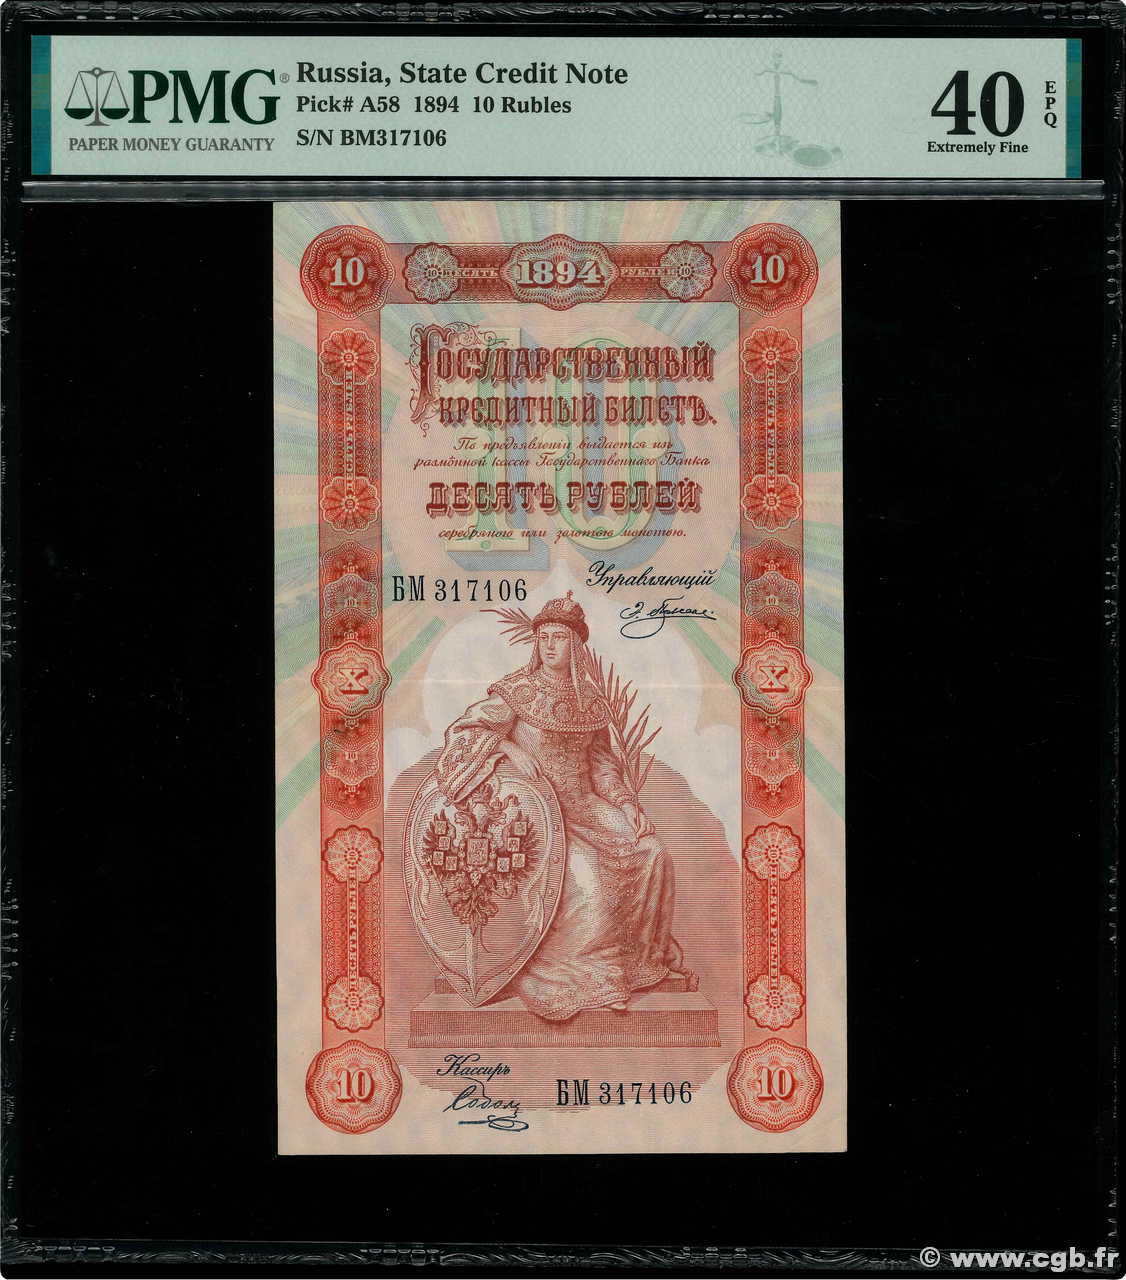 10 Roubles RUSSIA  1894 P.A58 VF+